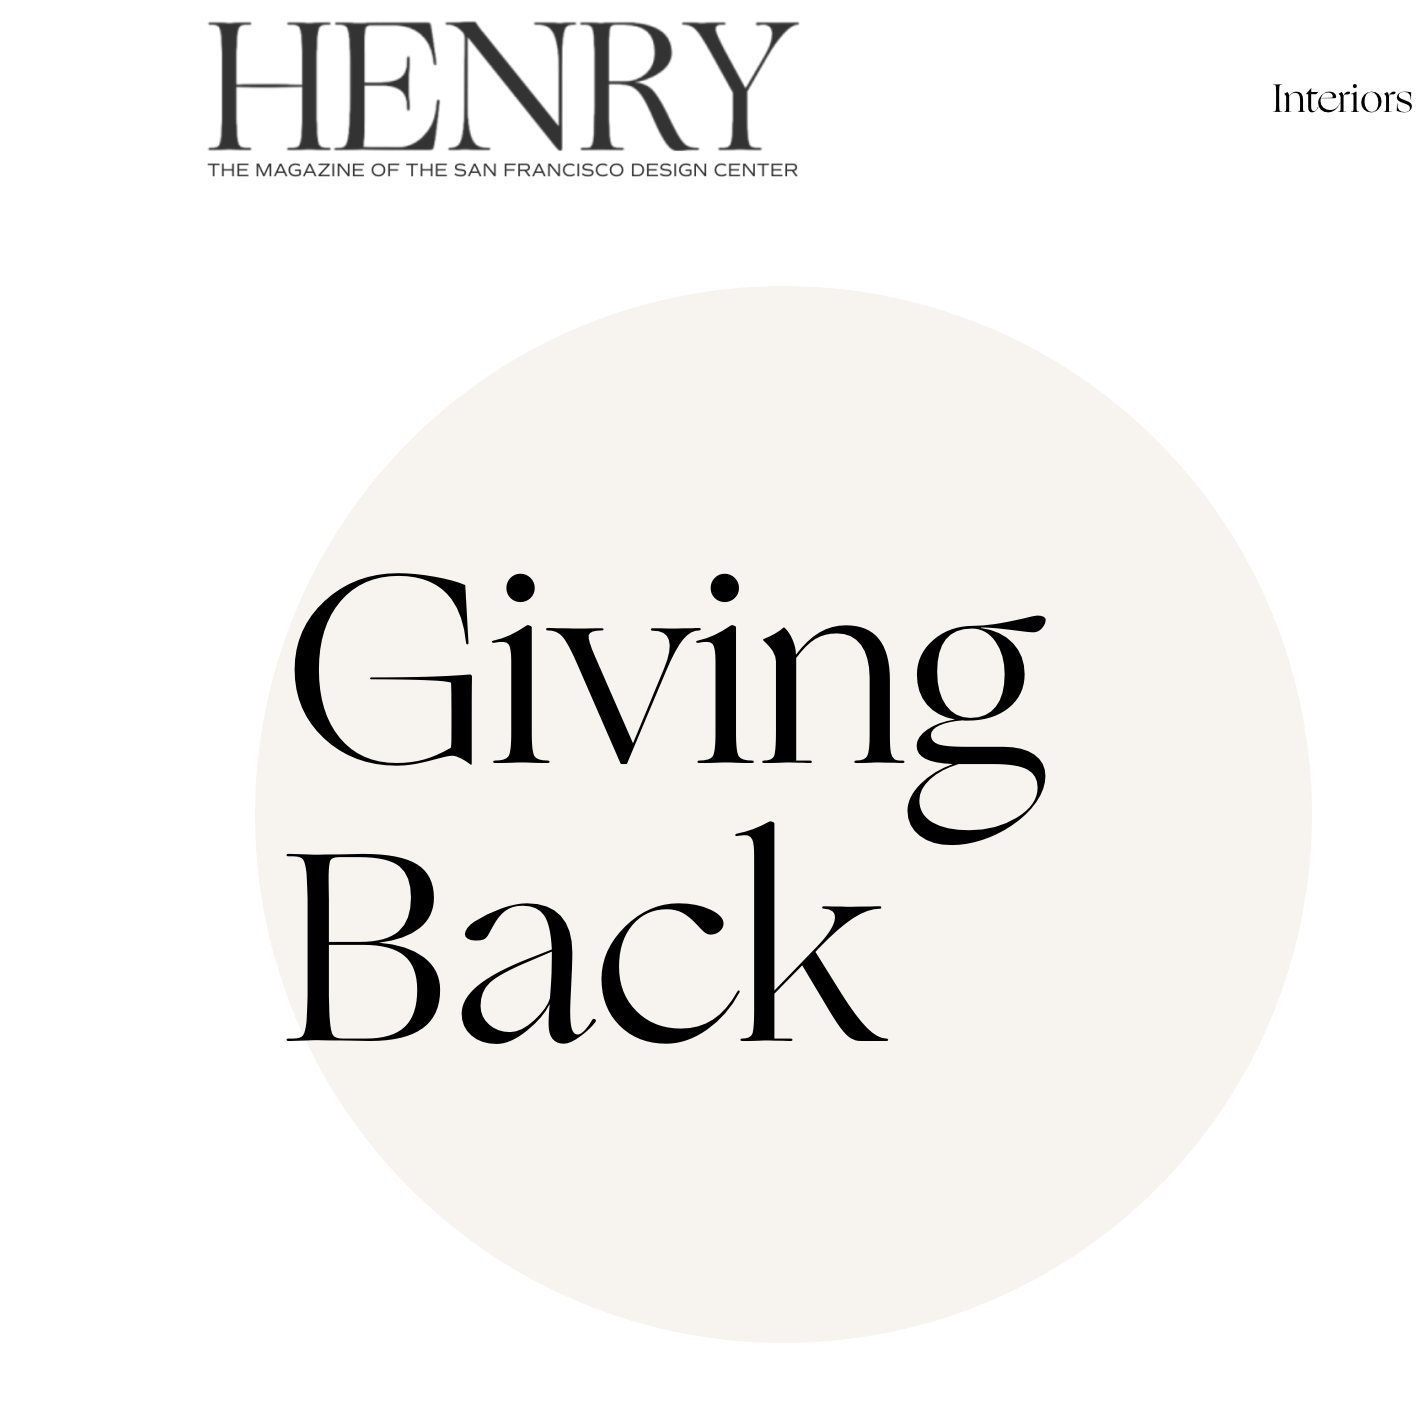 Make It Home's innovative approach to ending furniture poverty earned a mention in Henry Magazine, which showcases cutting-edge design in San Francisco and Silicon Valley